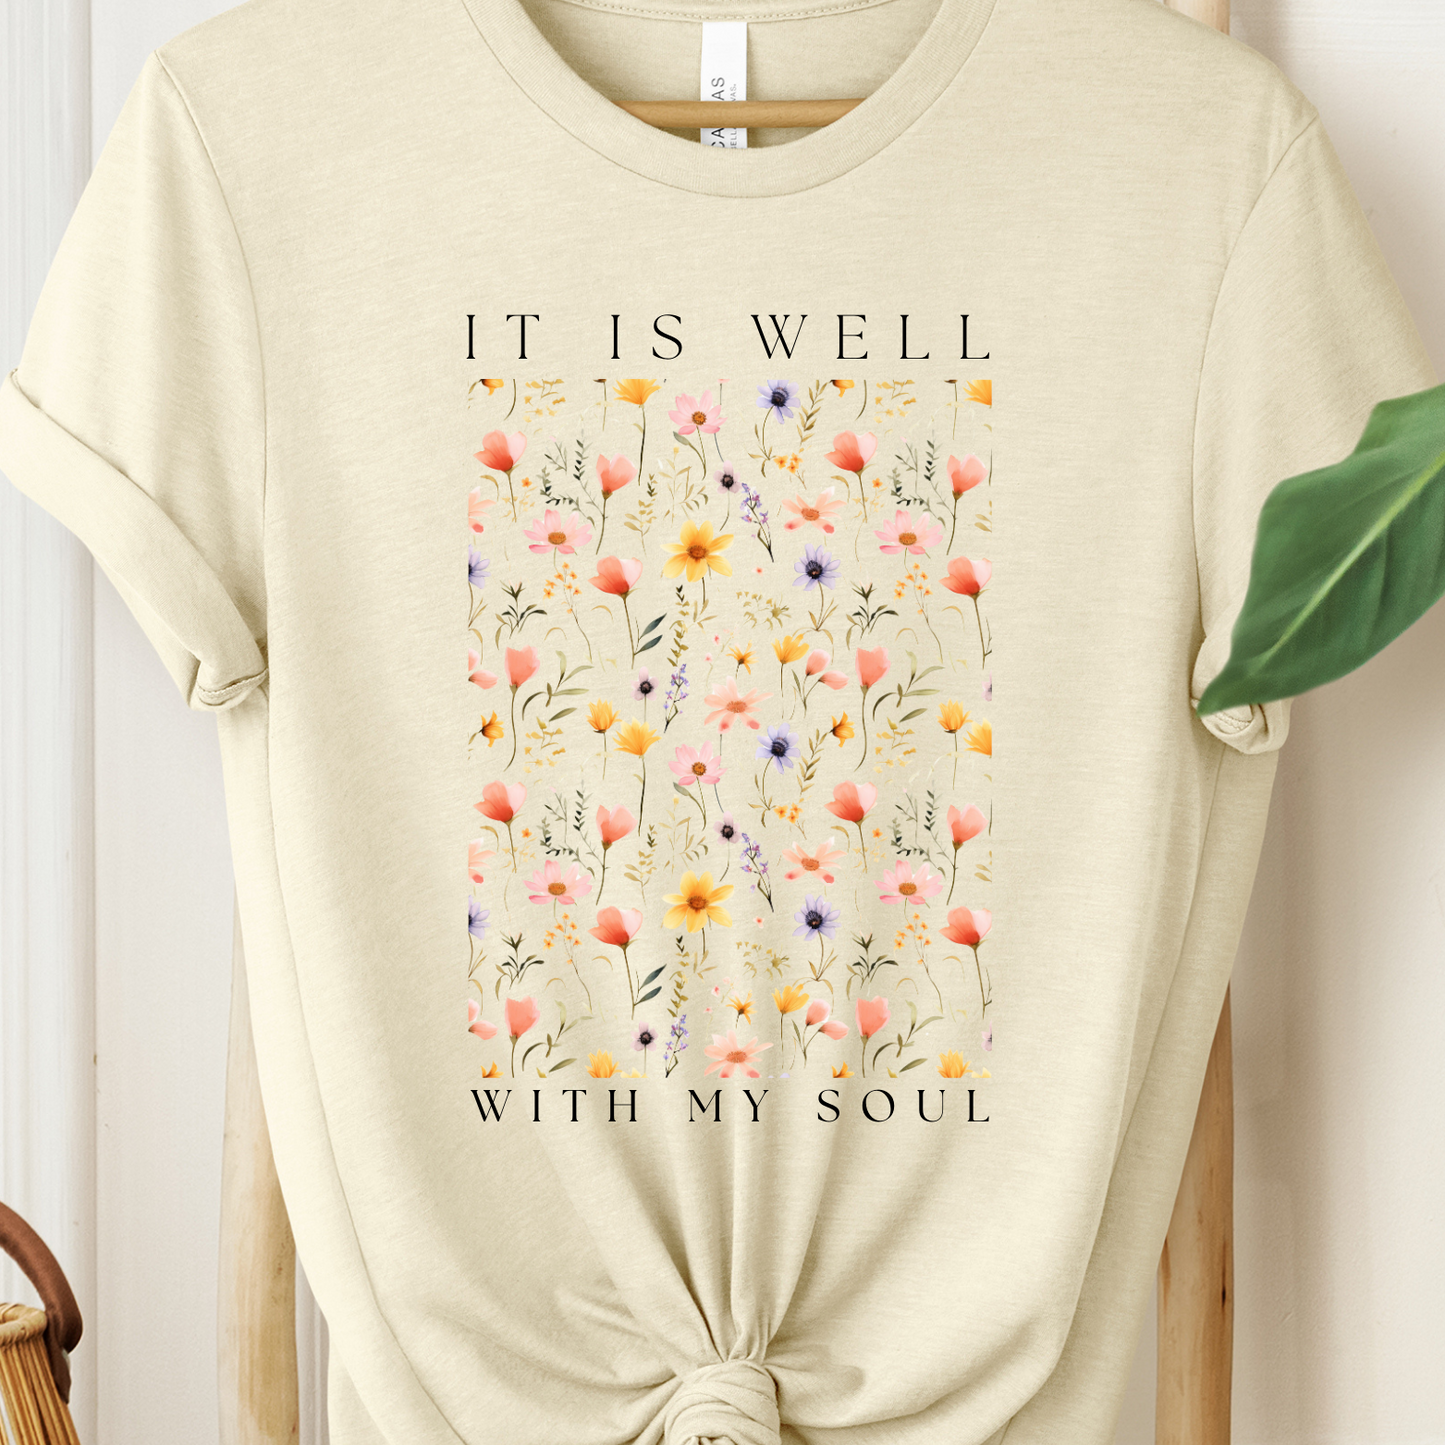 IT IS WELL WITH MY SOUL (wholesale)